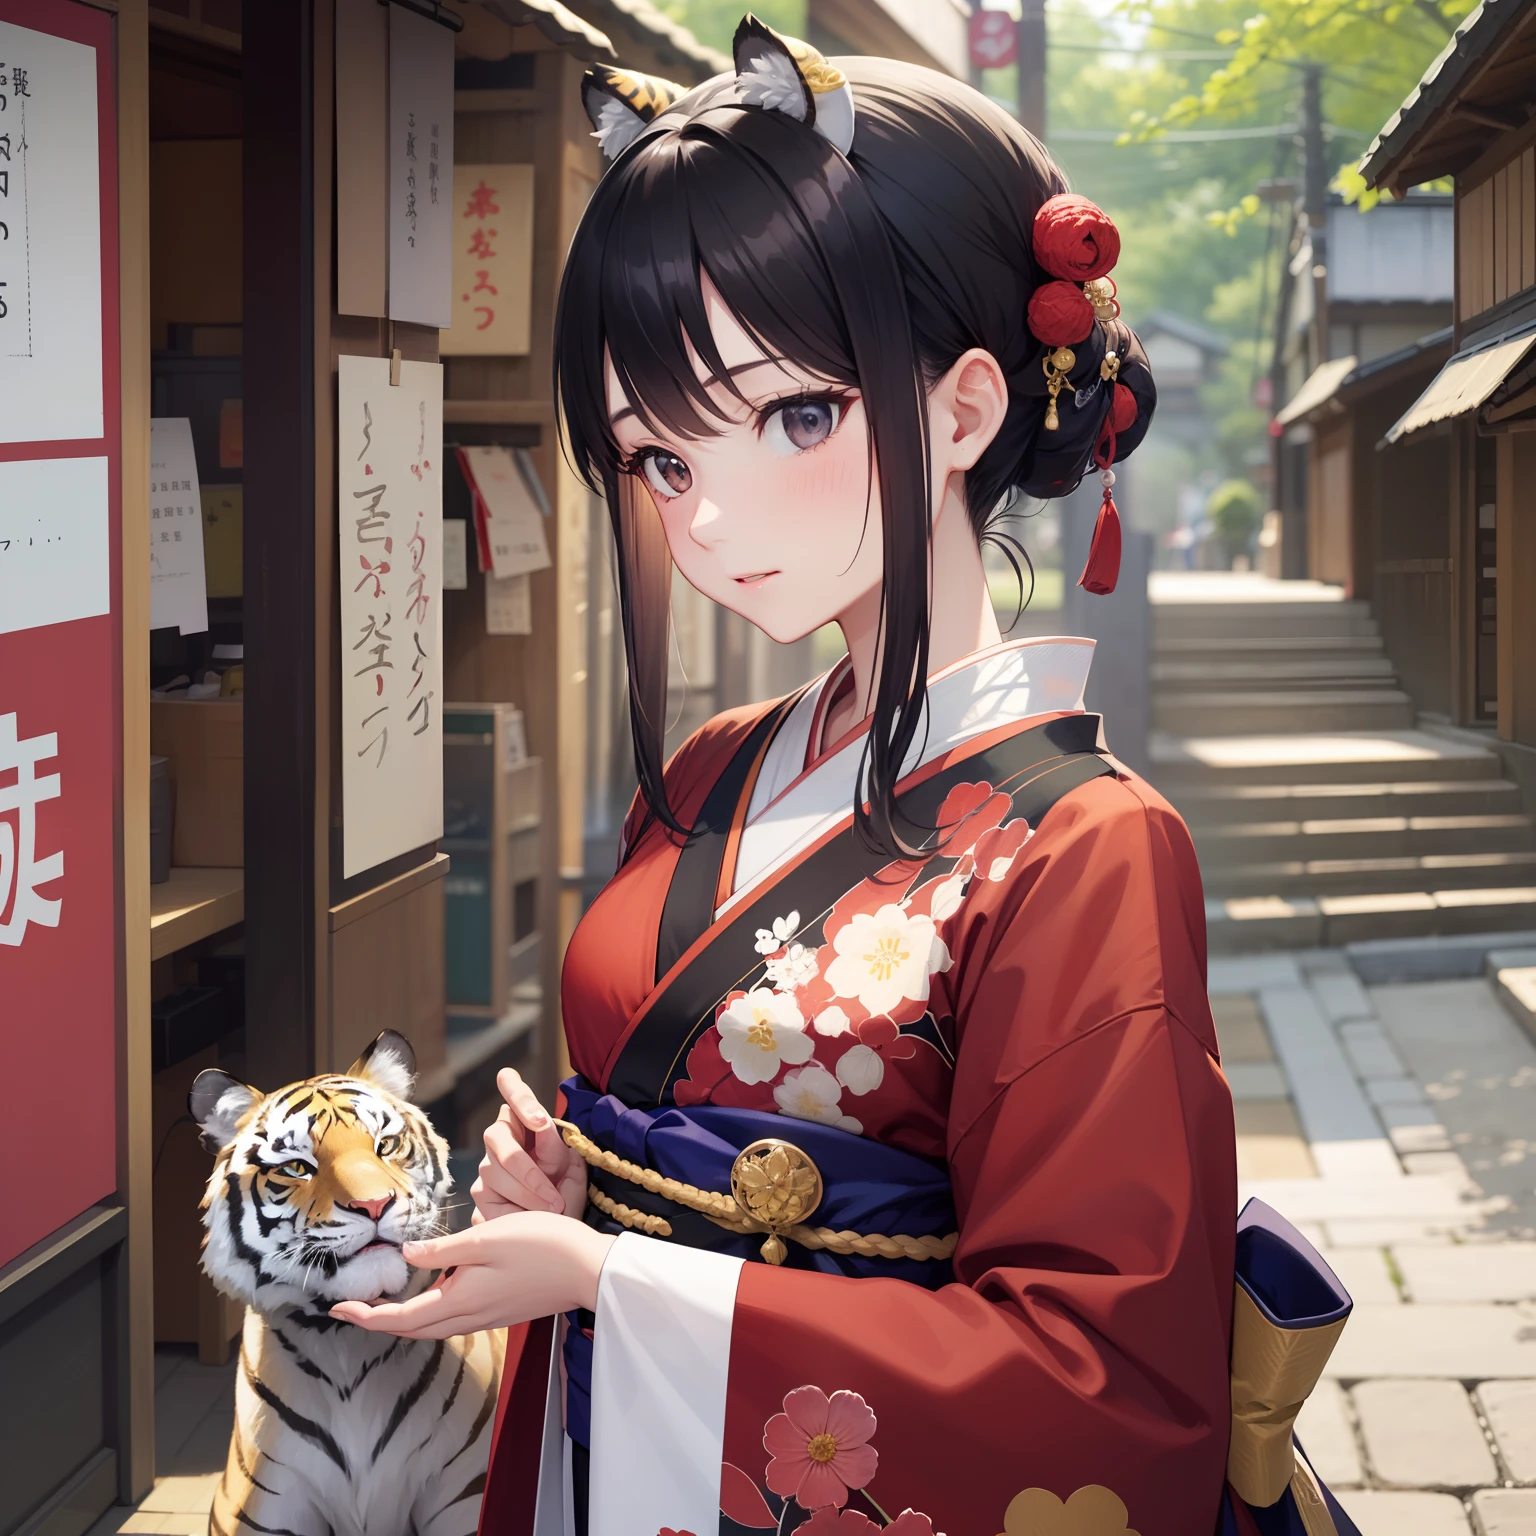 Please make Japan Taisho era girls the main、The quality is the highest and the most detailed、In an anime style、Seriousness 100％、Technical Capabilities 100％serve、Cute, Delicate, graceful and elegant、Tiger and White Tiger